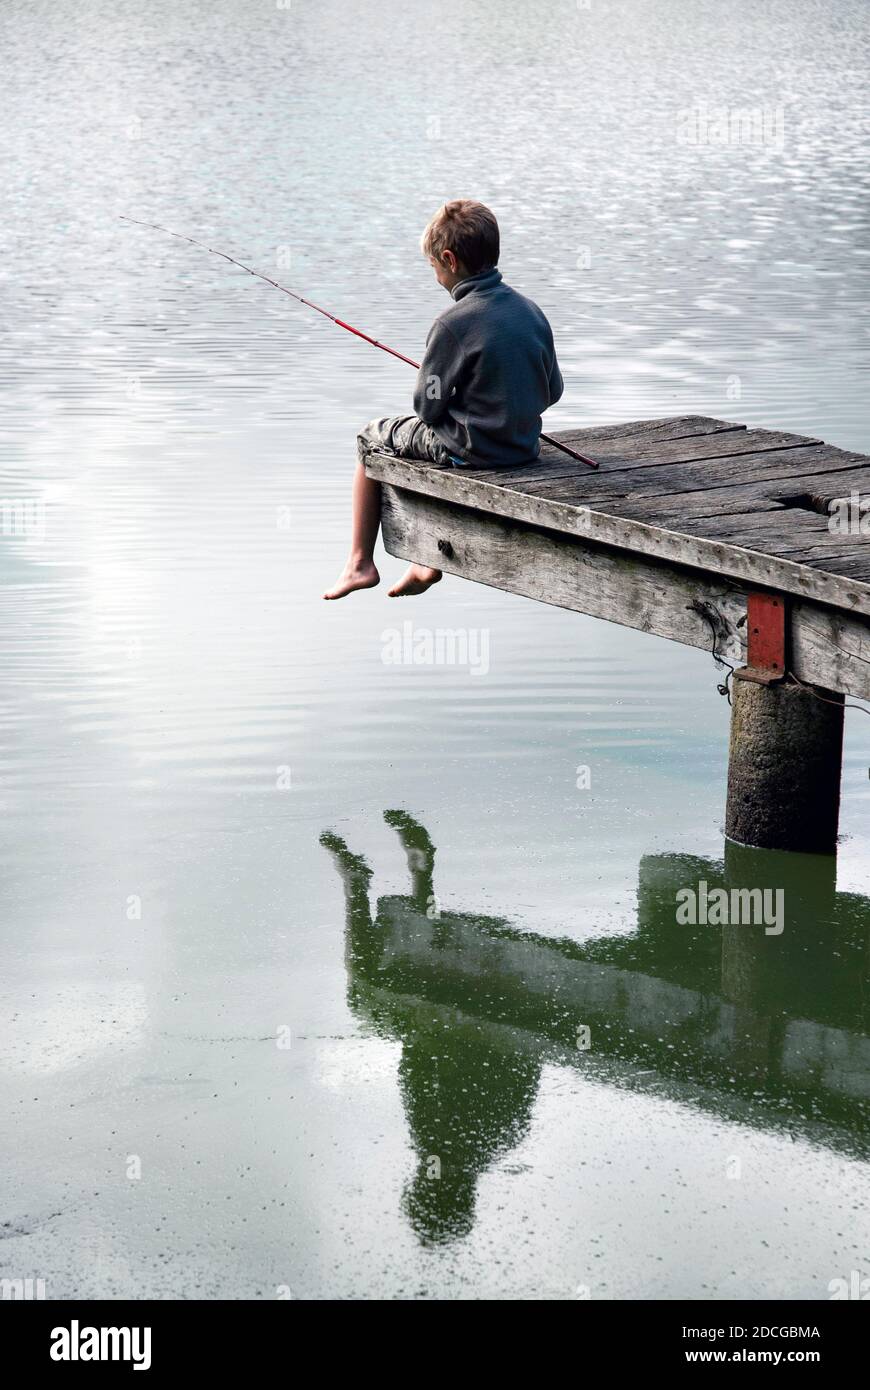 https://c8.alamy.com/comp/2DCGBMA/small-boy-fishing-in-pond-with-cane-rod-and-reflection-while-sitting-on-wooden-jetty-france-2DCGBMA.jpg